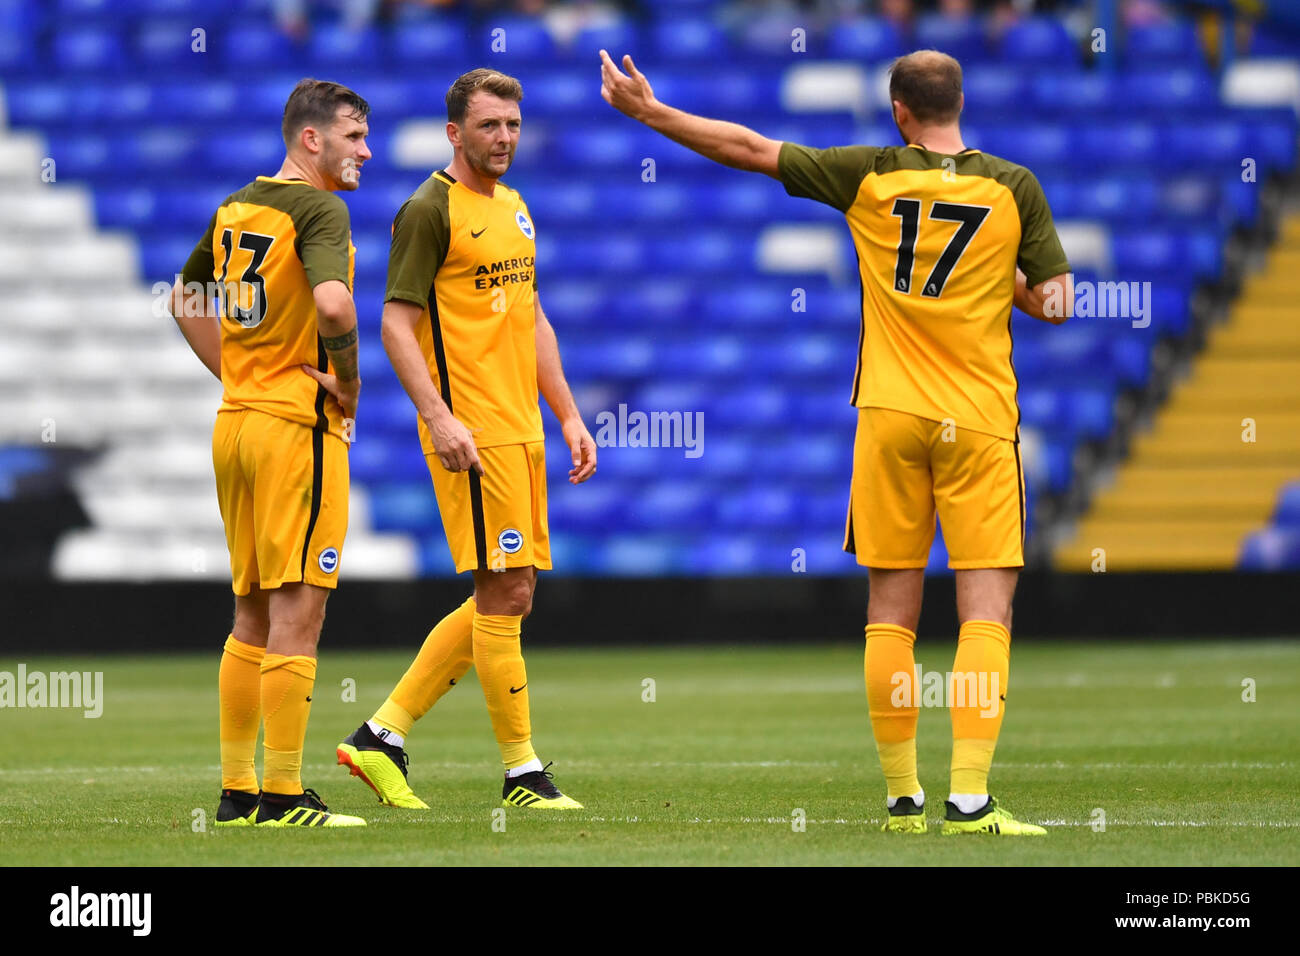 Brighton & Hove Albion's Pascal Gross, Brighton & Hove Albion's Dale Stephens and Brighton & Hove Albion's Glenn Murray exchange words during the pre-season friendly match at the St Andrew's Trillion Trophy Stadium, Birmingham. Stock Photo